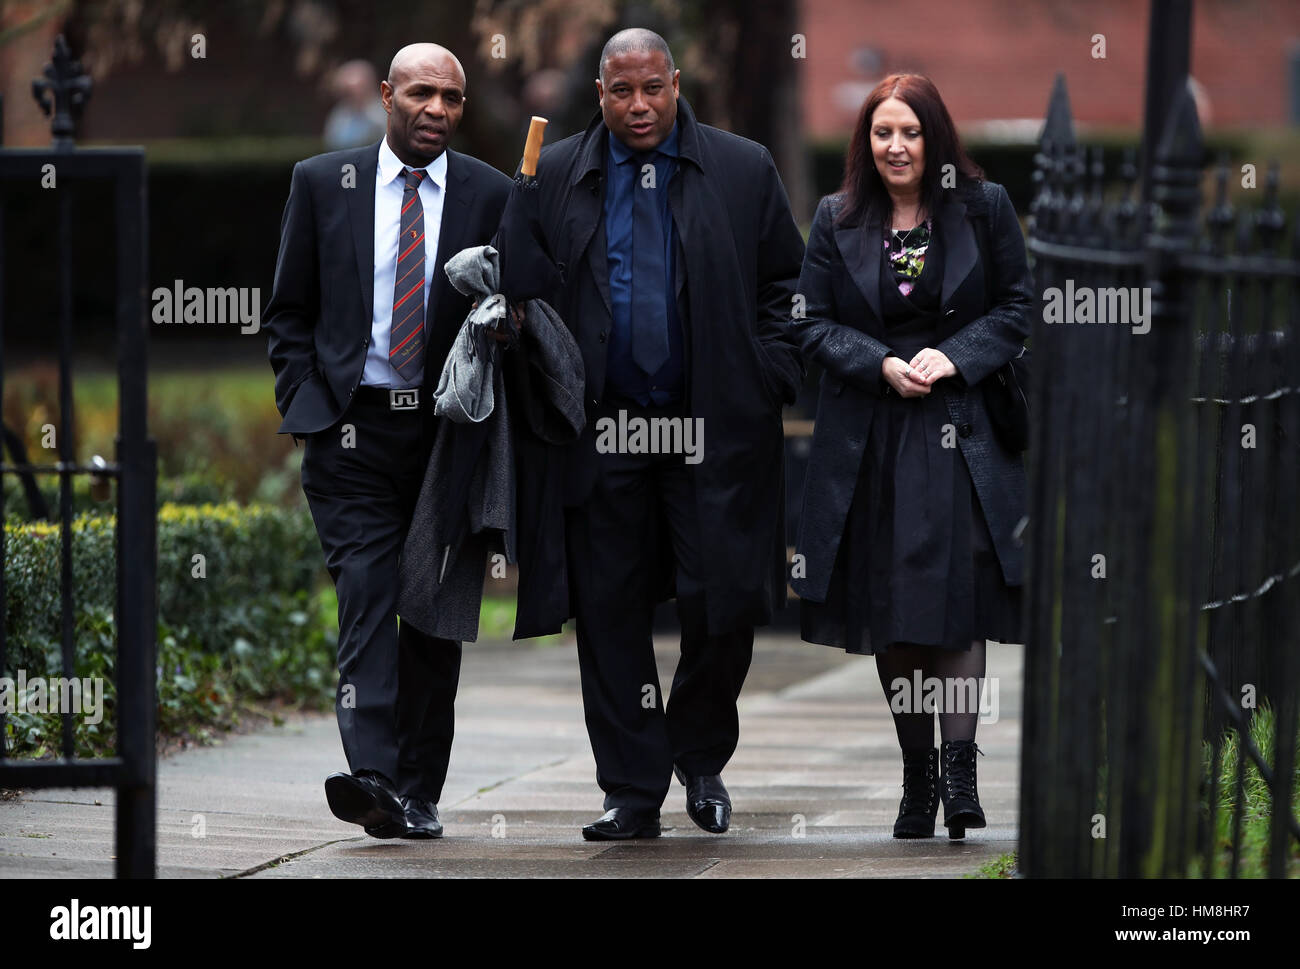 John Barnes (centre) and Luther Blissett (left) arrive for the funeral service for Graham Taylor held at St Mary's Church, Watford. Stock Photo